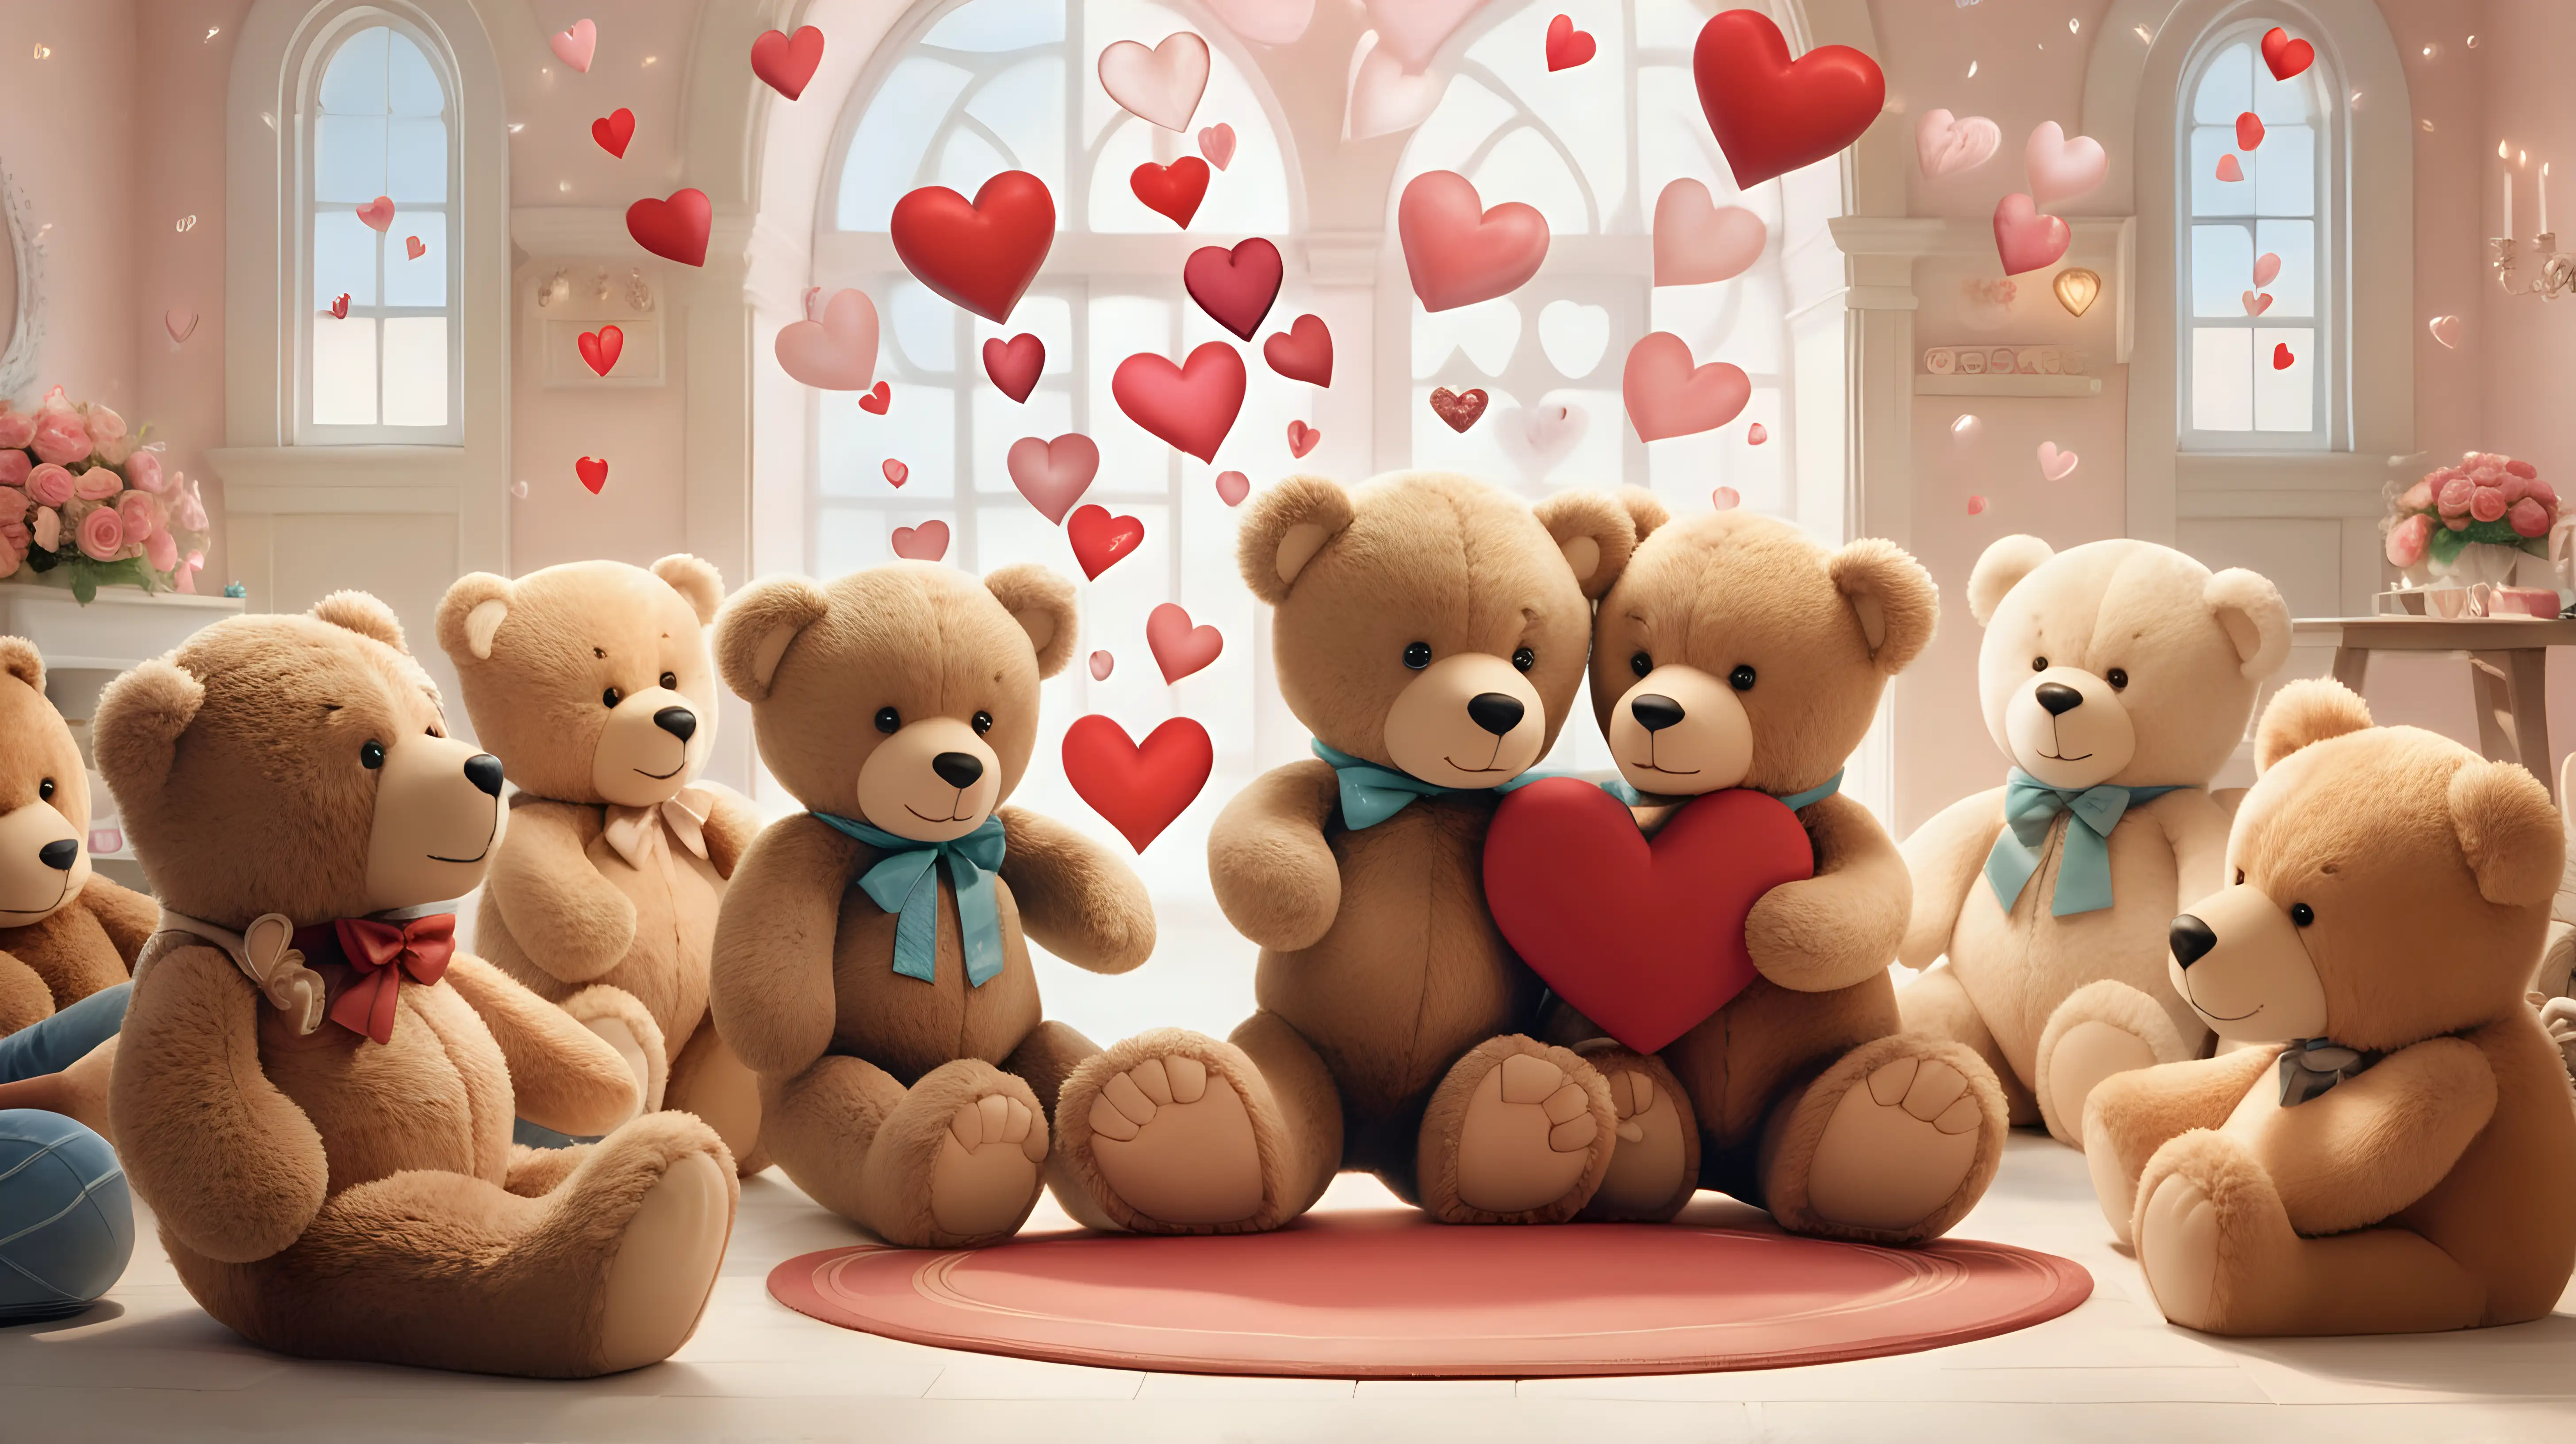 A heartwarming scene with a blank space in the middle, encircled by love-filled hearts and cuddly teddy bear companions.